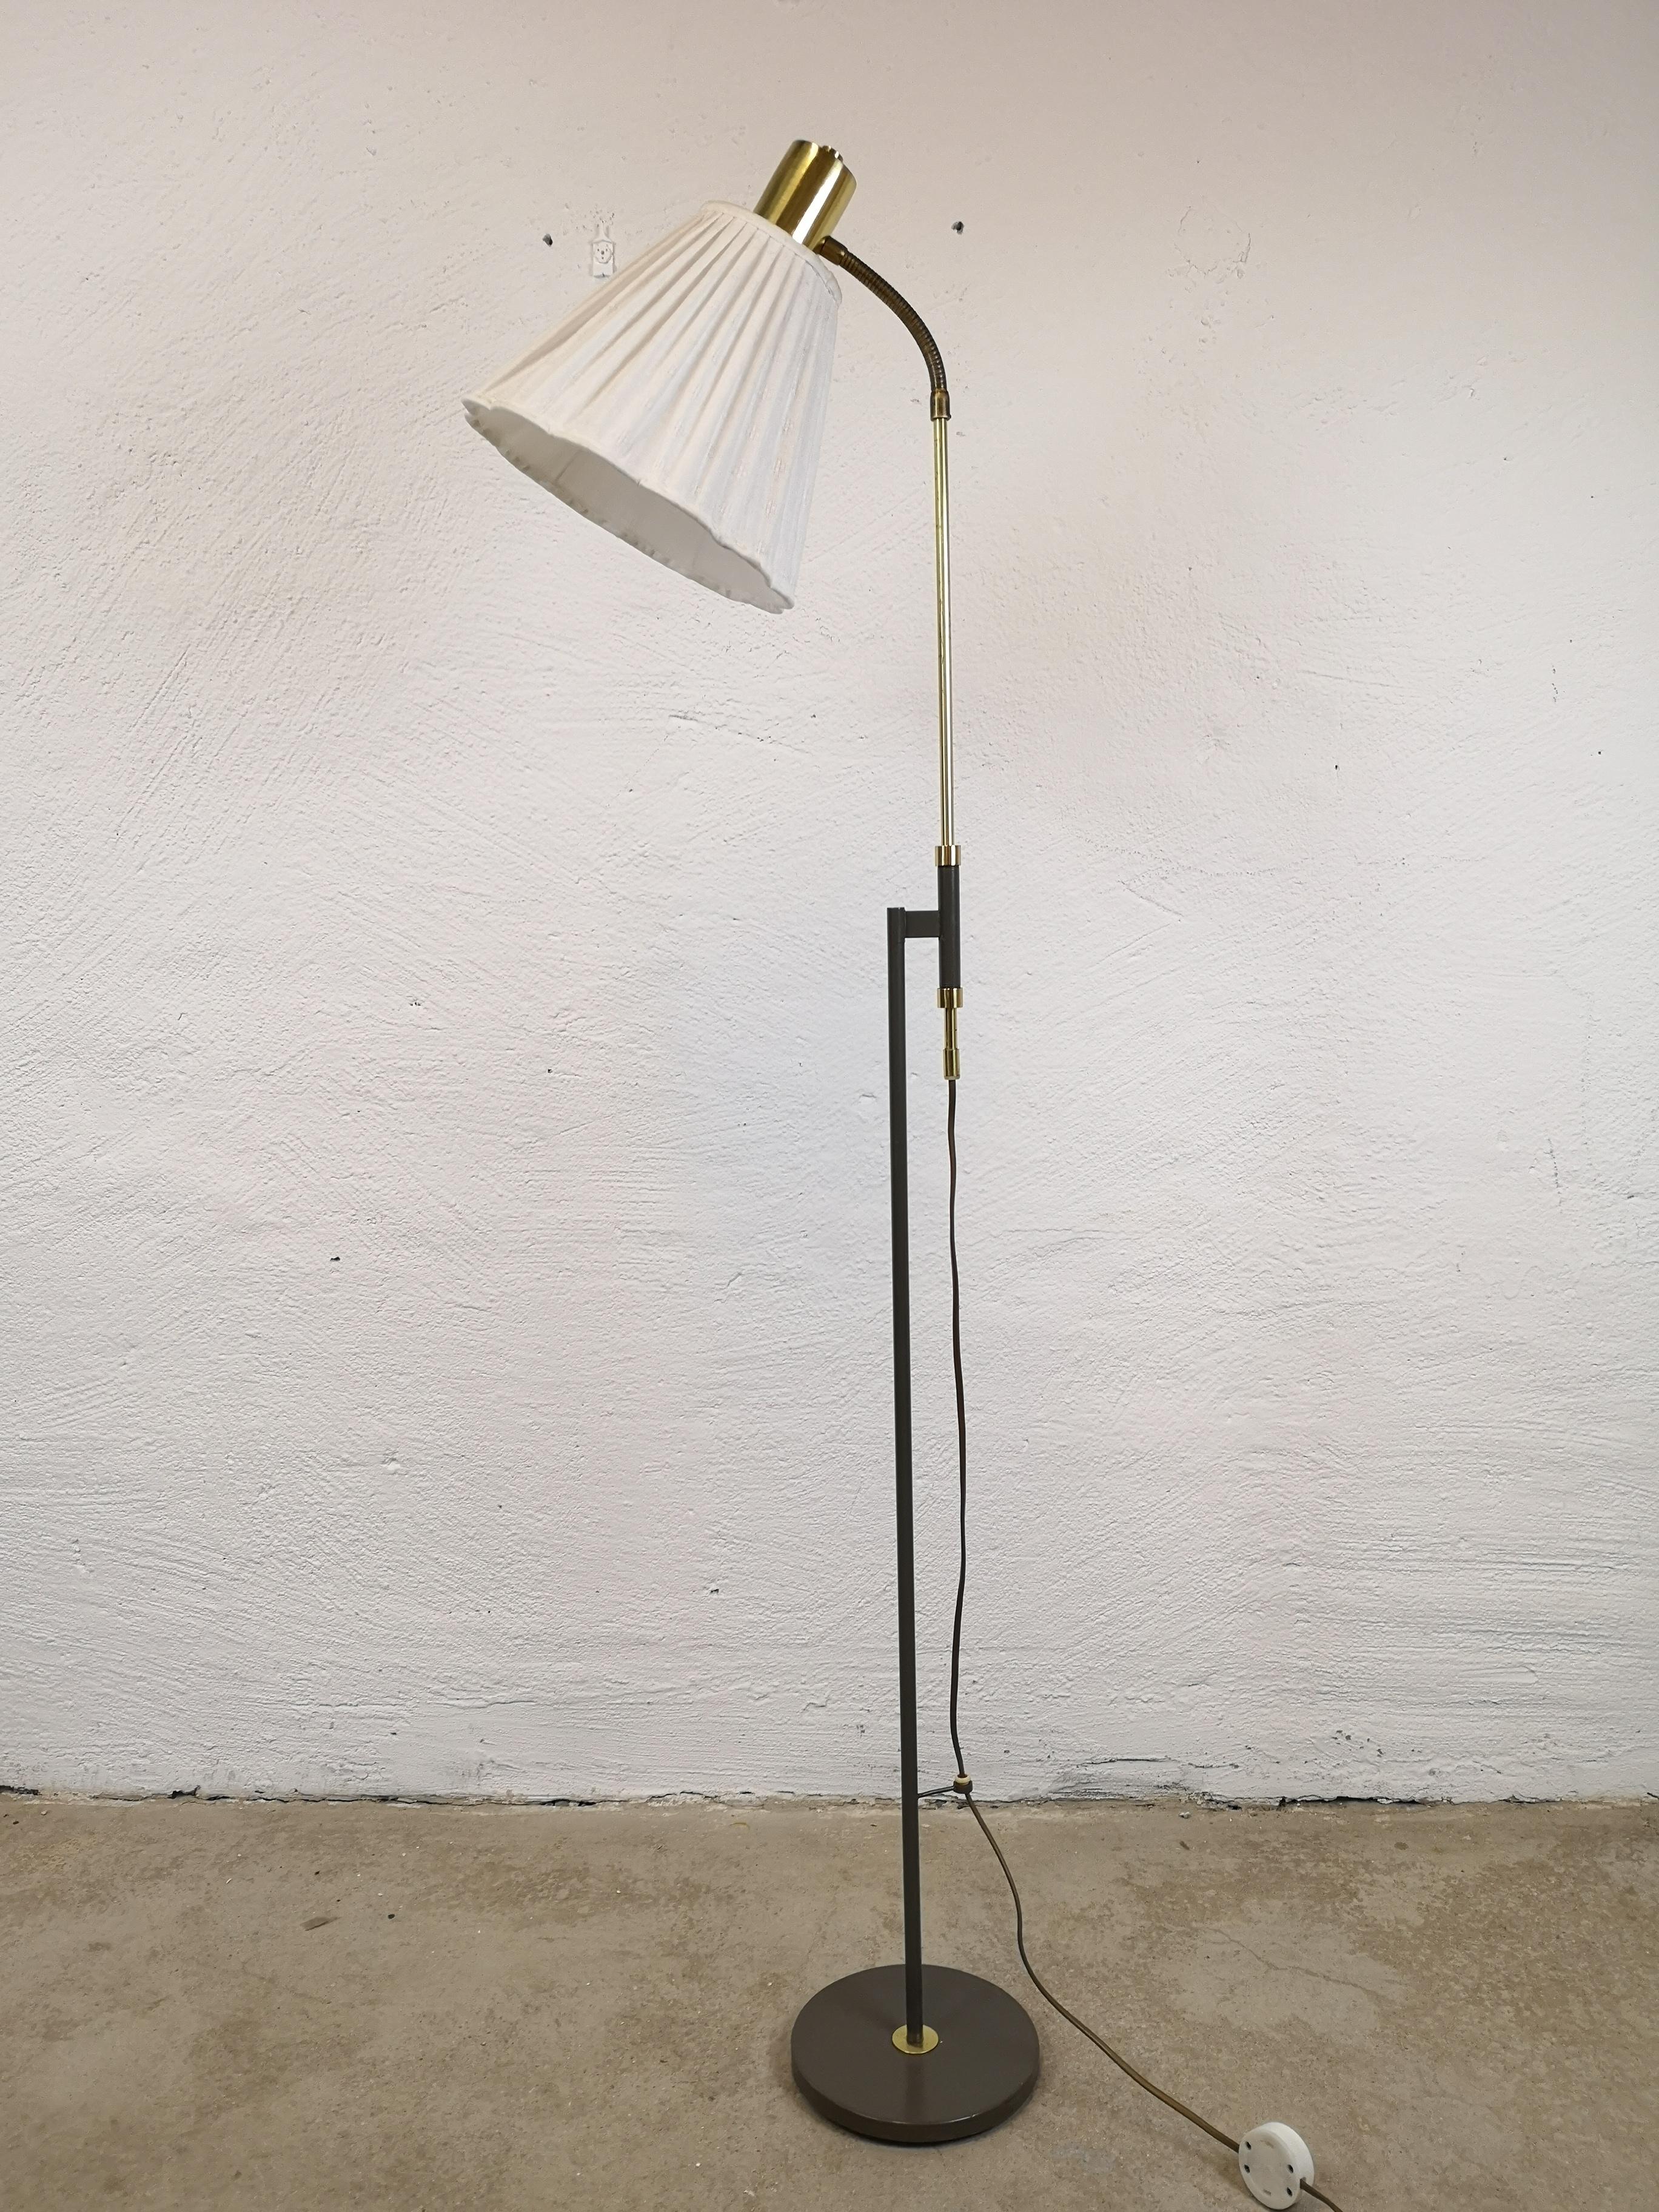 This lamp was made in Sweden at Falkenbergs Belysning. It has an adjustable height arm, and is made in brass and cast iron.

Good working condition with some dents on the foot and scratches on the brass.

Measures. H 133 cm x W 28 cm x D 45